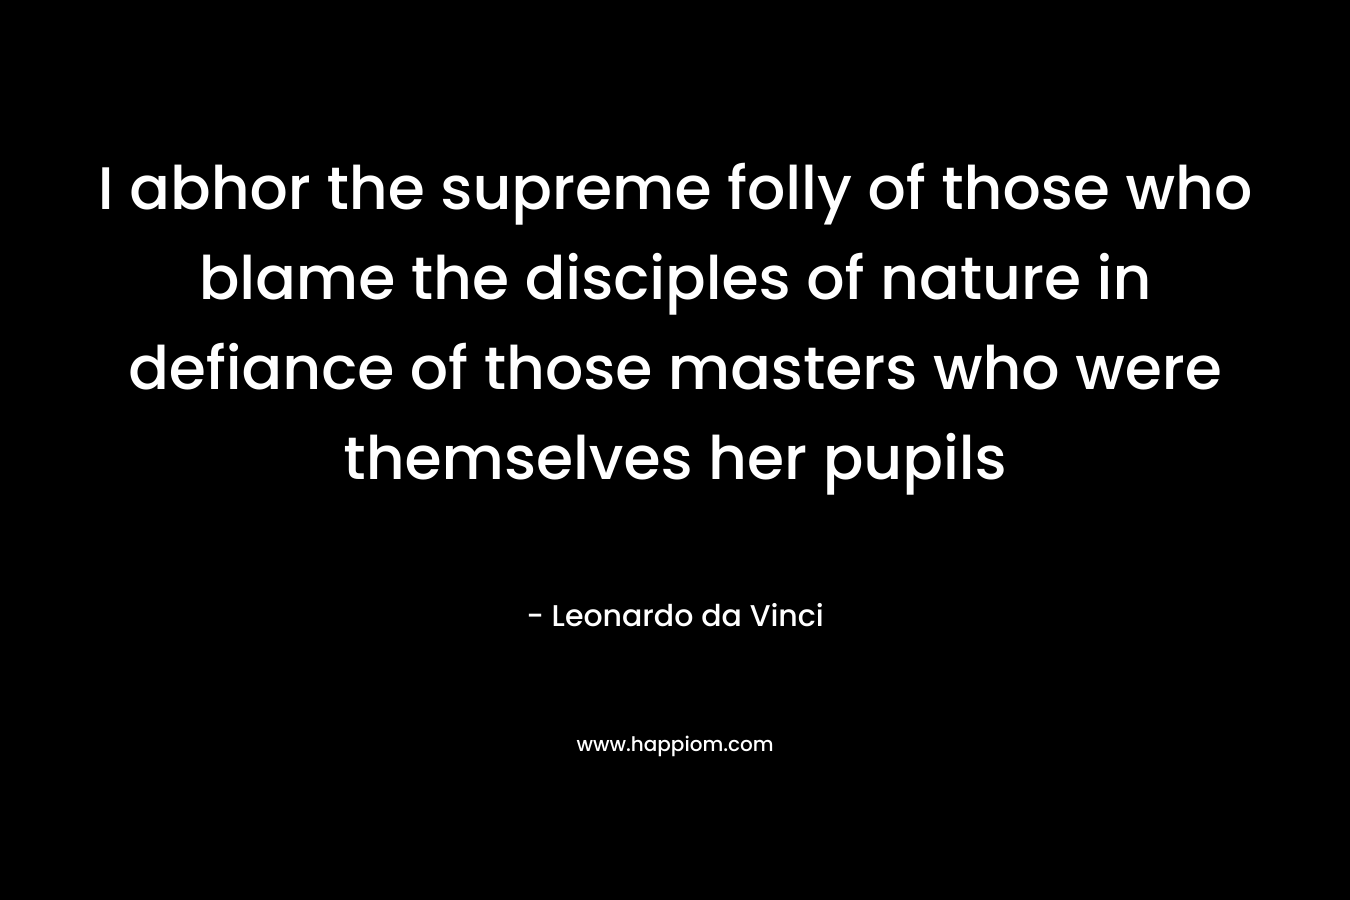 I abhor the supreme folly of those who blame the disciples of nature in defiance of those masters who were themselves her pupils – Leonardo da Vinci